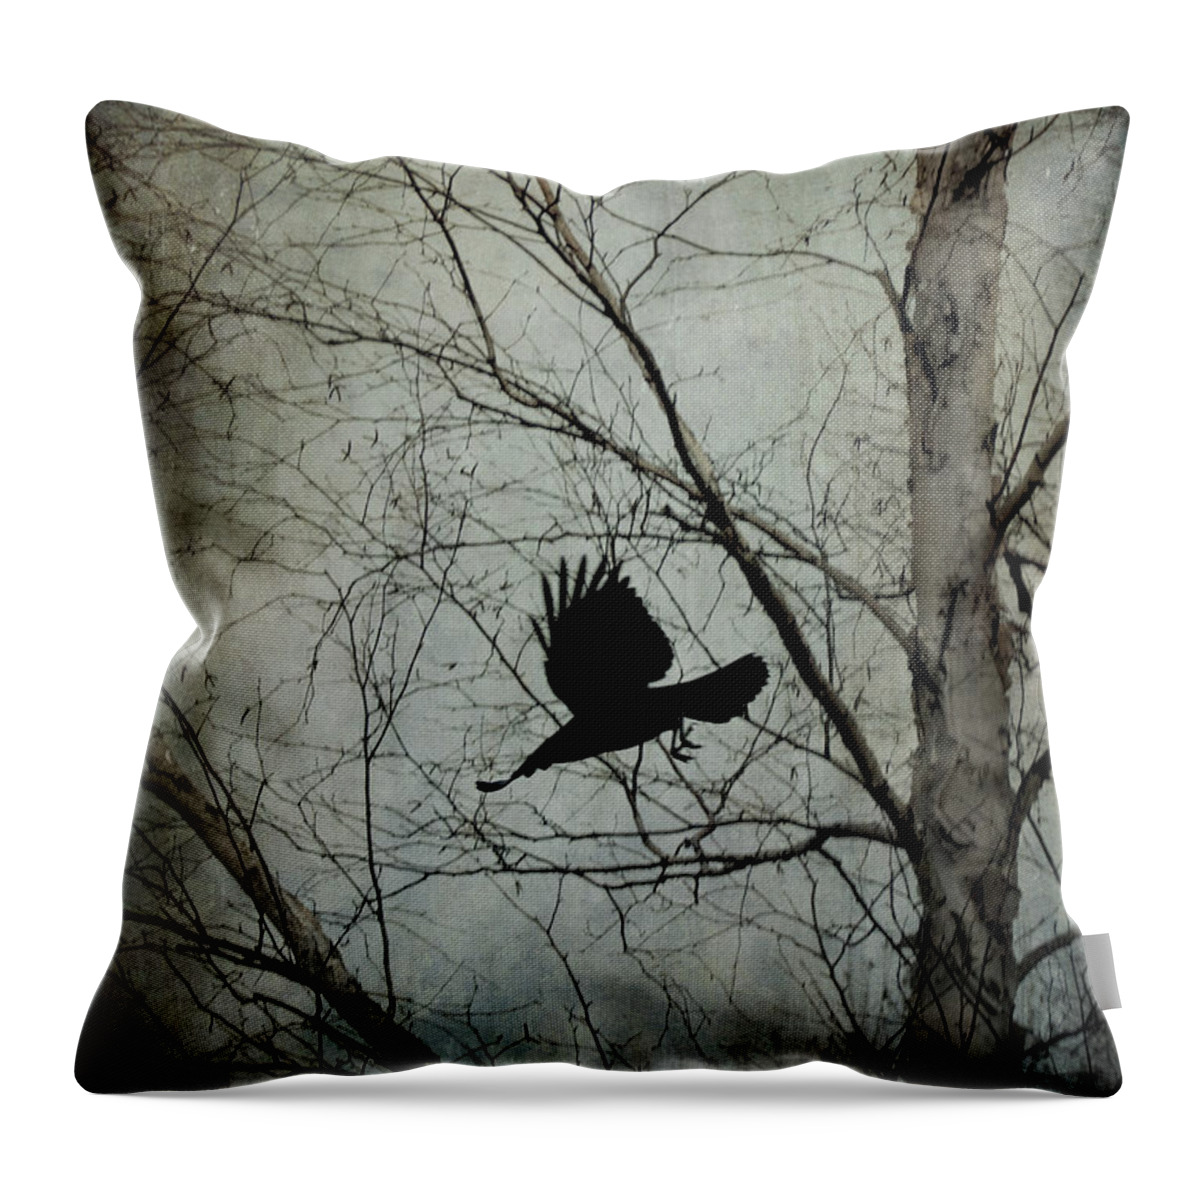  Throw Pillow featuring the photograph Let Go #1 by Angie Rea